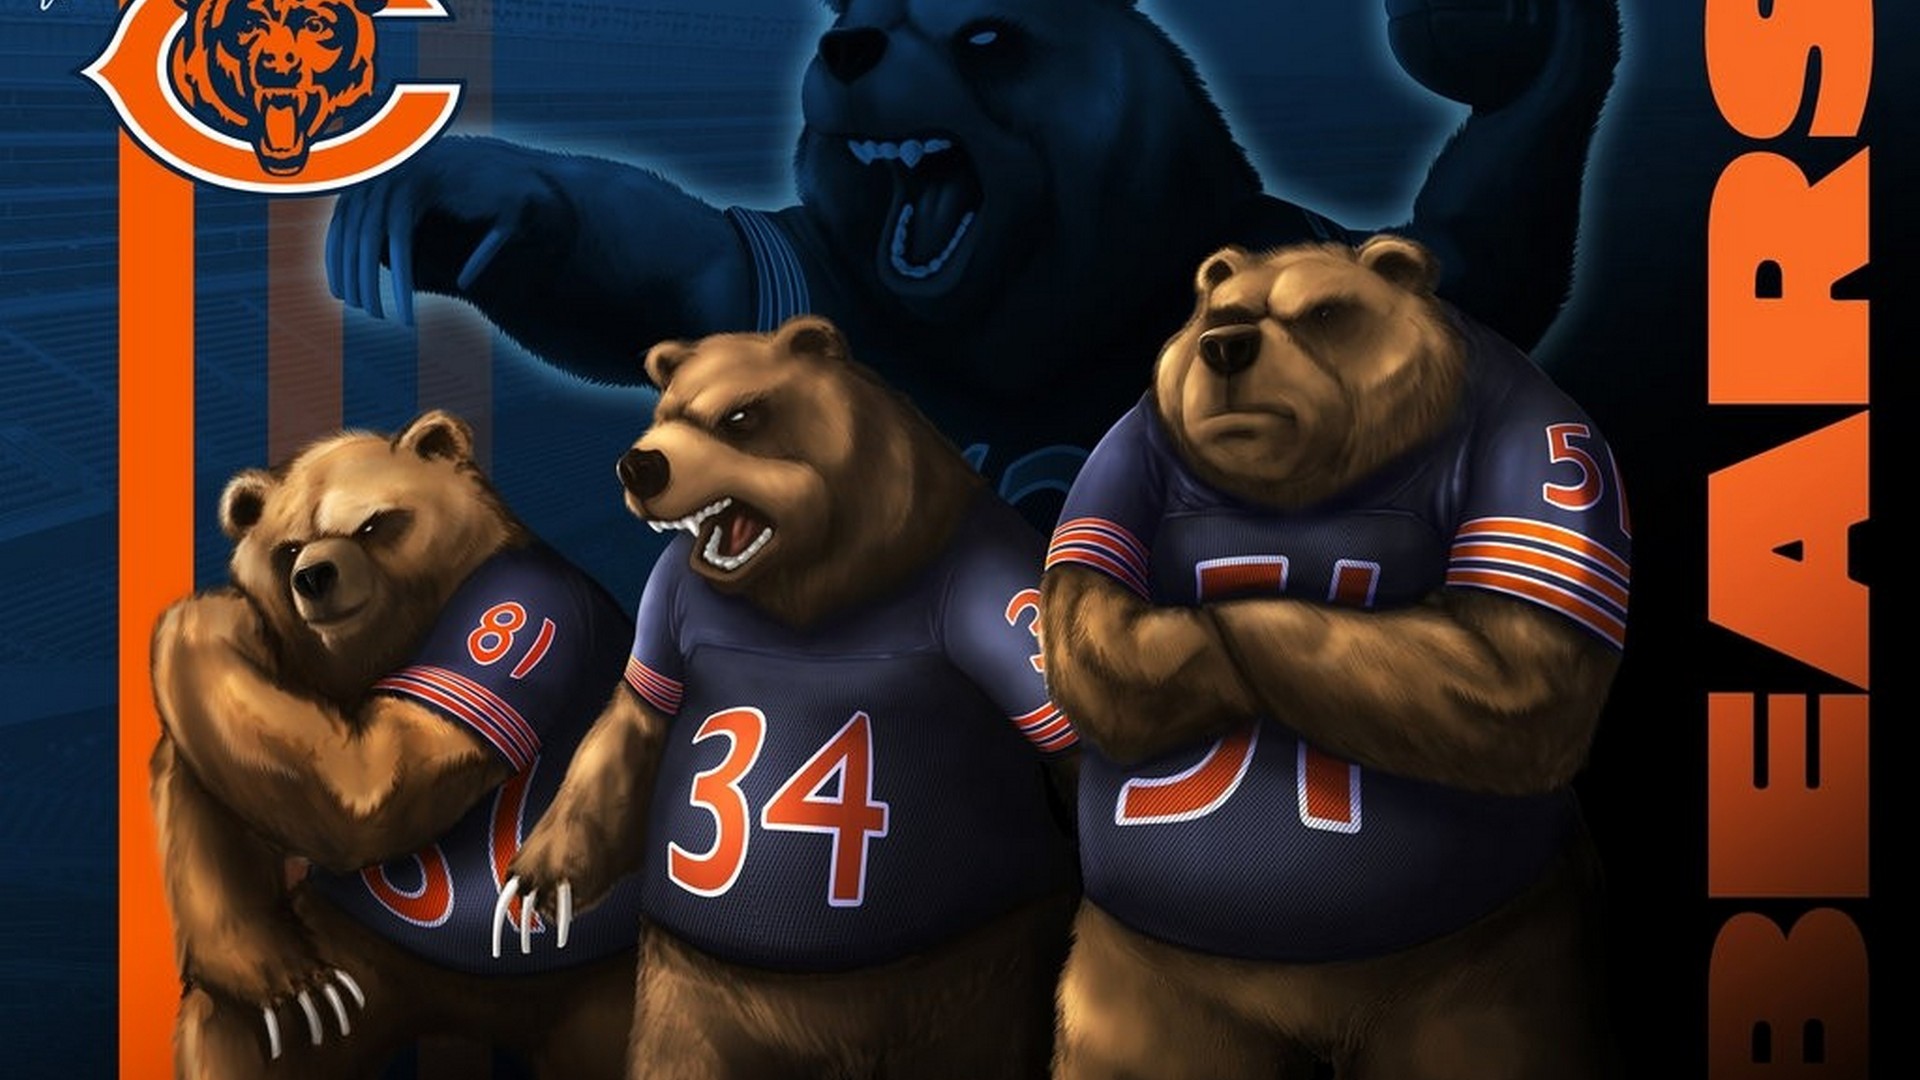 HD Backgrounds Chicago Bears 1920x1080